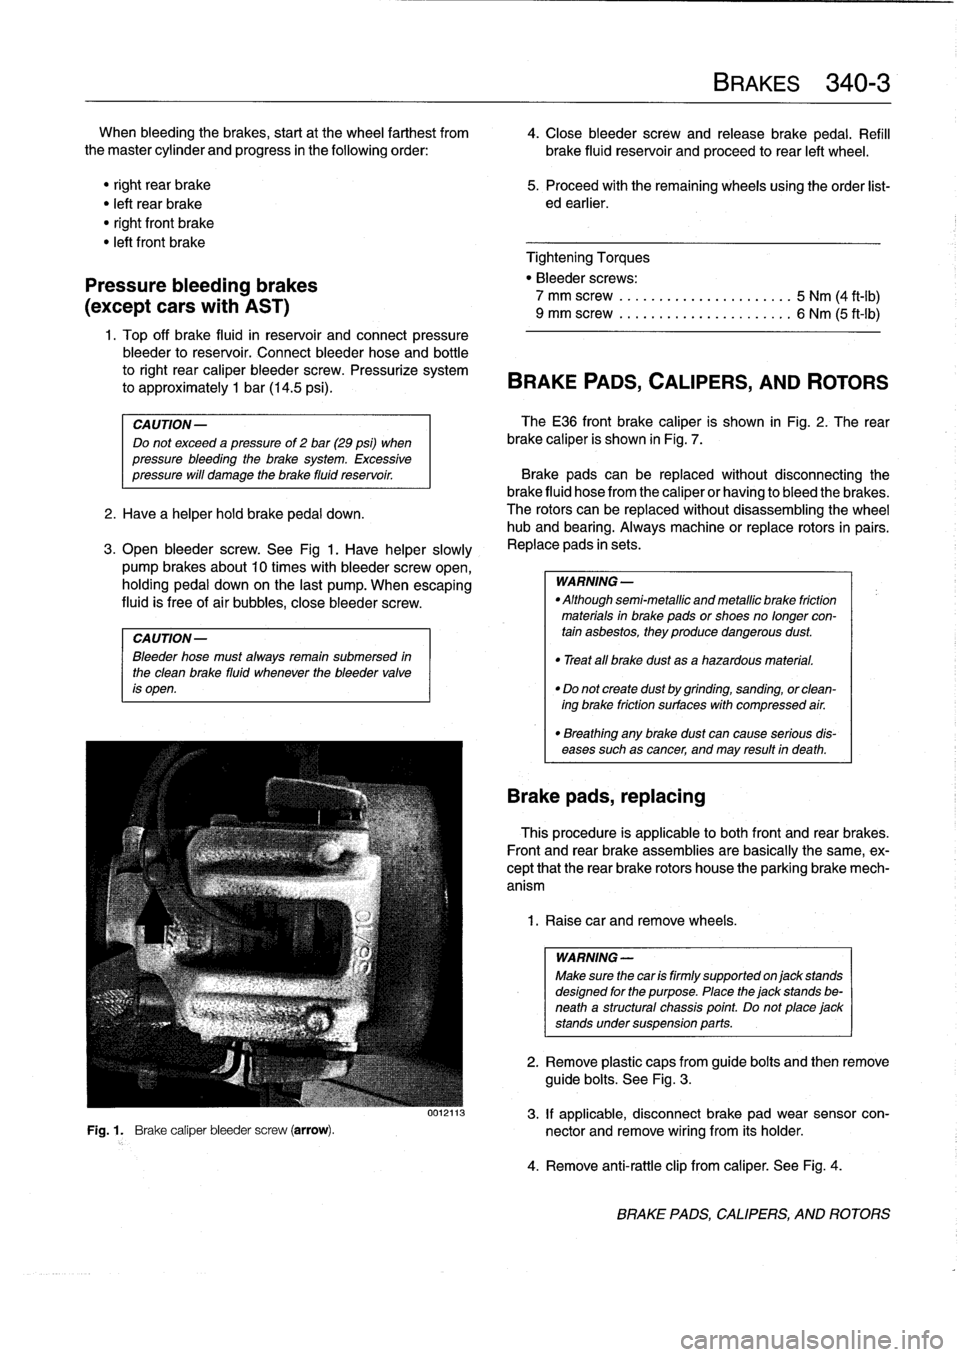 BMW 318i 1996 E36 Workshop Manual 
When
bleeding
the
brakes,
startat
the
wheel
farthest
from

	

4
.
Close
bleeder
screw
and
release
brake
pedal
.
Refill
the
master
cylinder
and
progress
in
the
following
order
:

	

brake
fluid
reserv